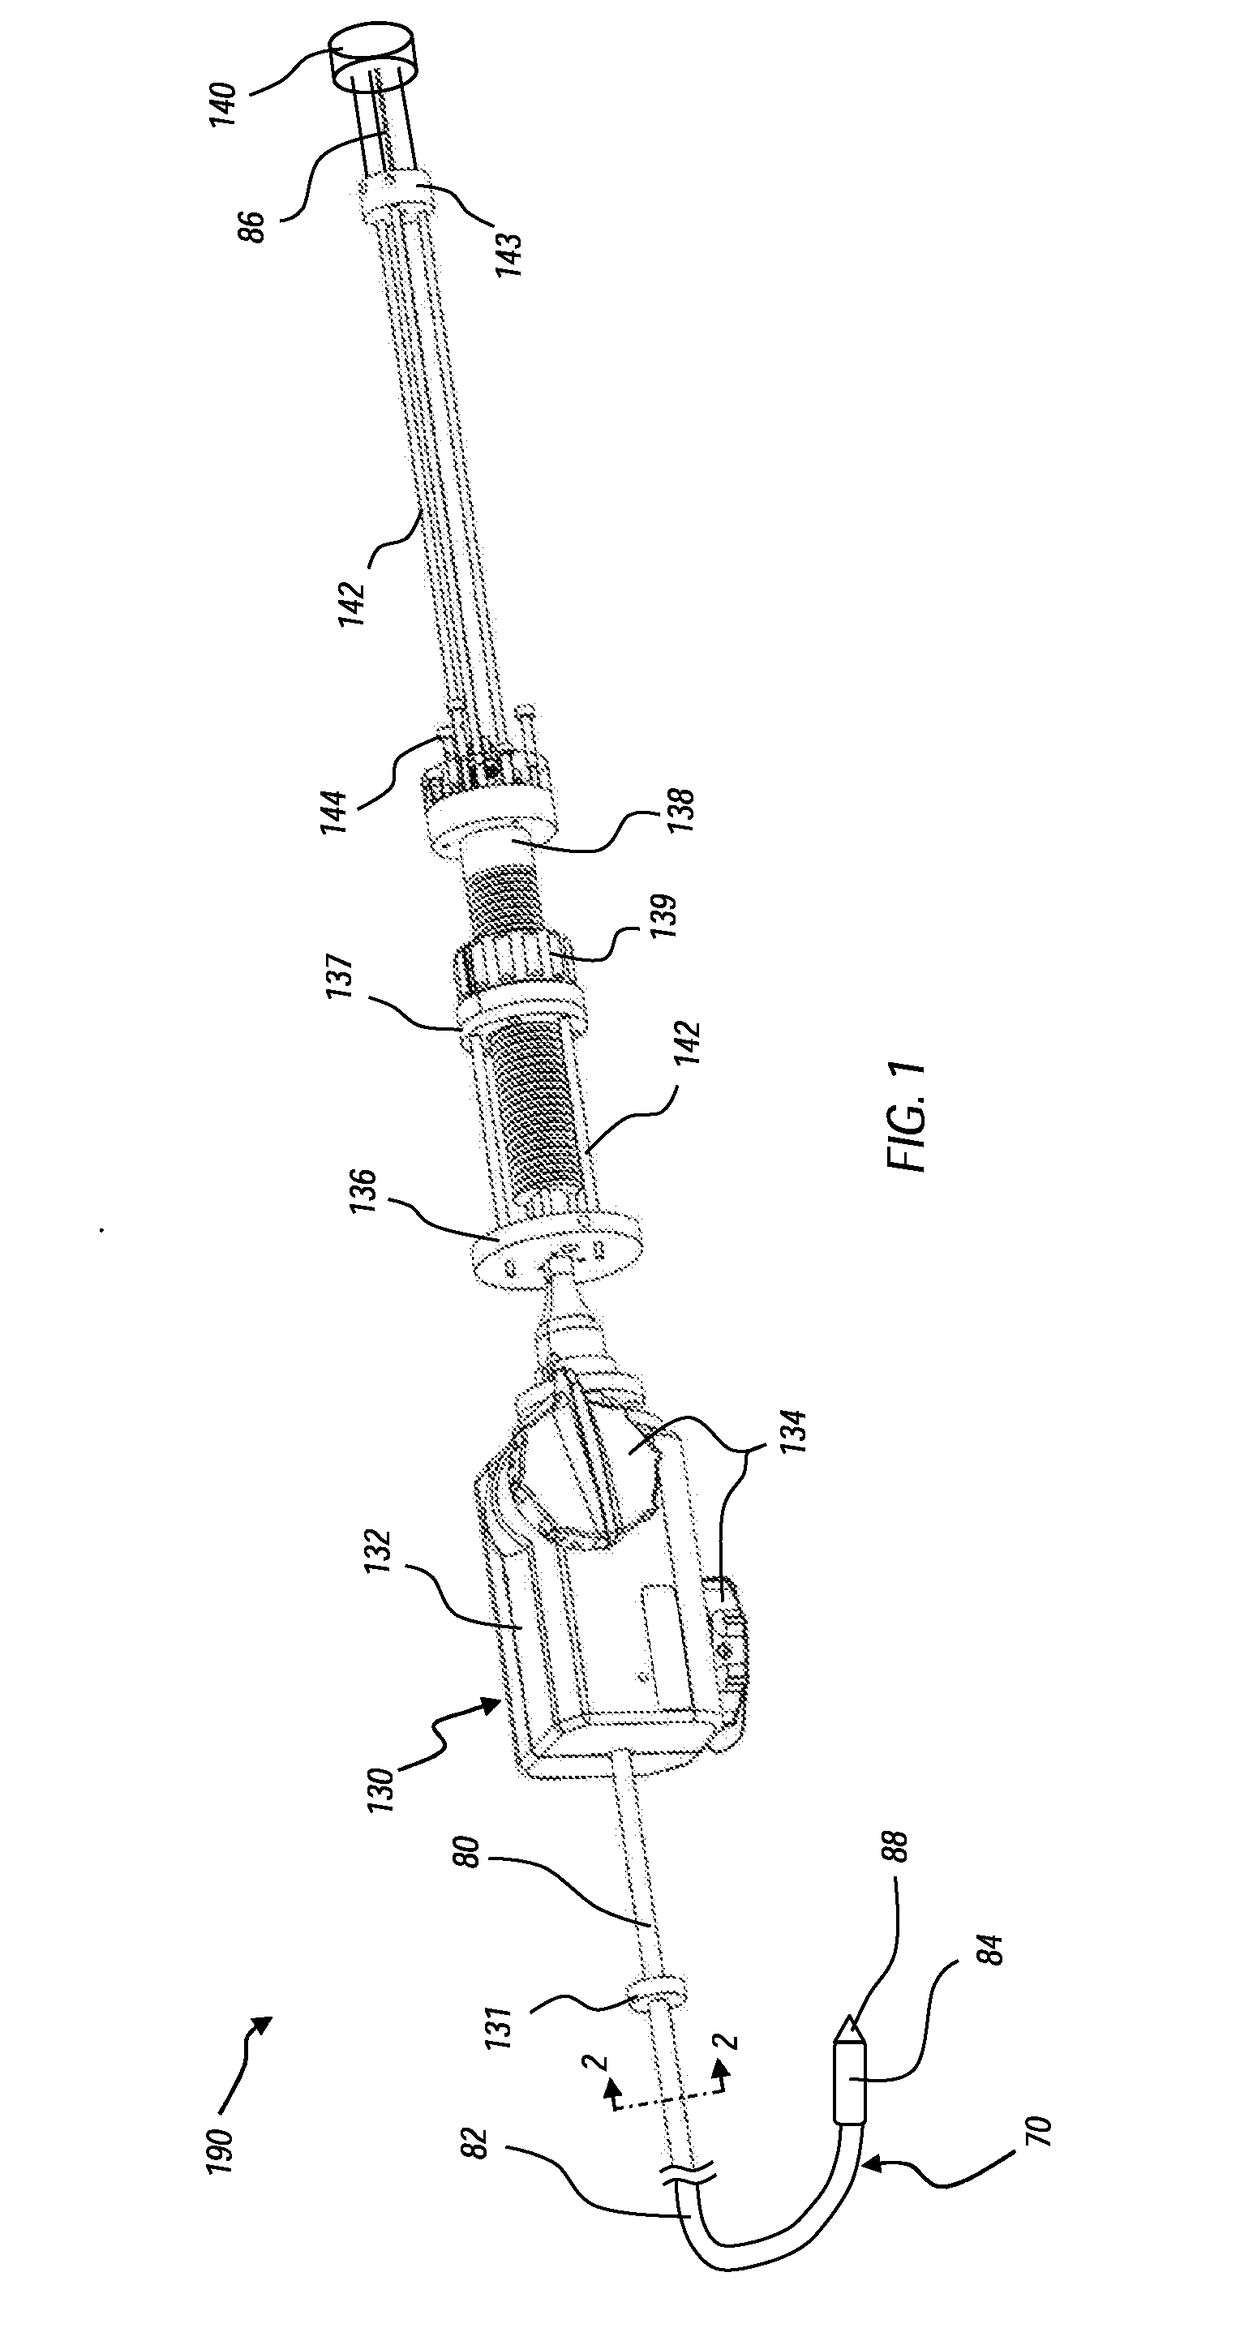 Systems and methods for delivering an intravascular device to the mitral annulus